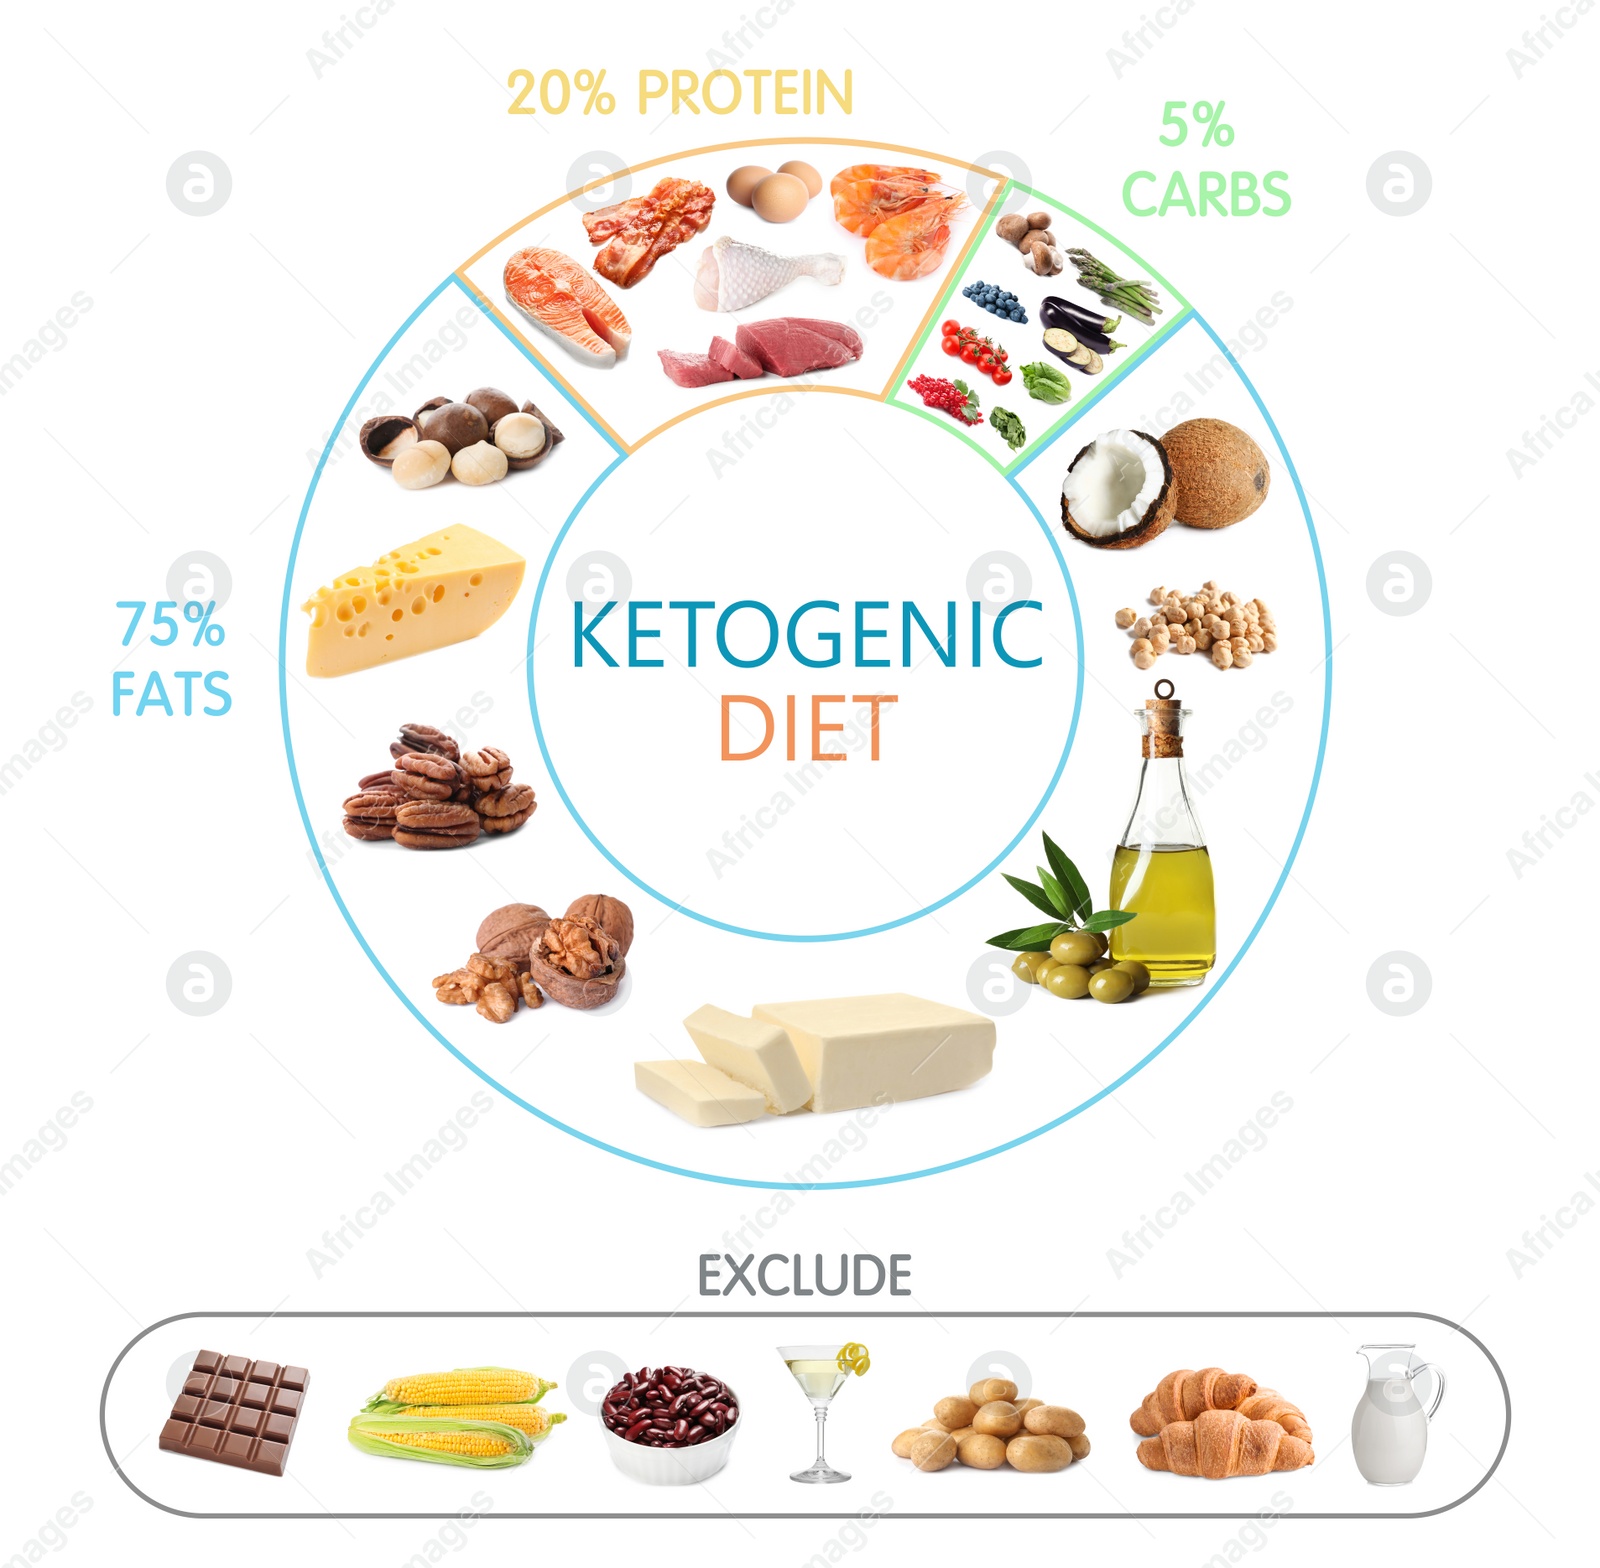 Image of Food chart on white background. Ketogenic diet